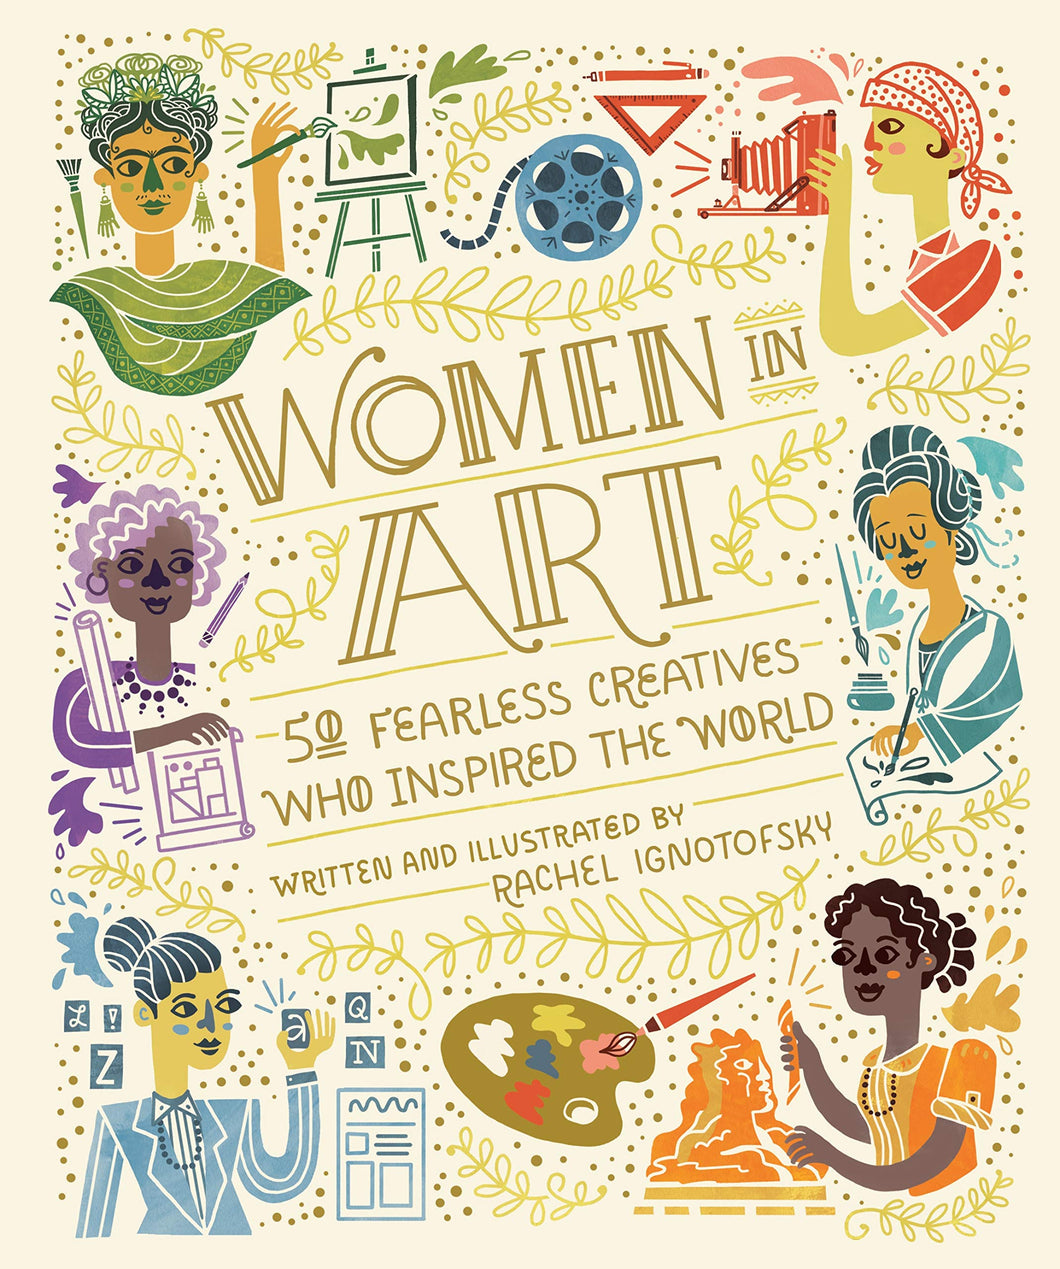 women in art 50 fearless creatives who inspired the world rachel ignotofsky charming illustrated inspiring book books art artists artistry achievements notable frida kahlo georgia o'keefe harriet powers hopi-tewa array artistic mediums fascinating collection history statistics museums female creators generations ten speed press penguin random house gift 